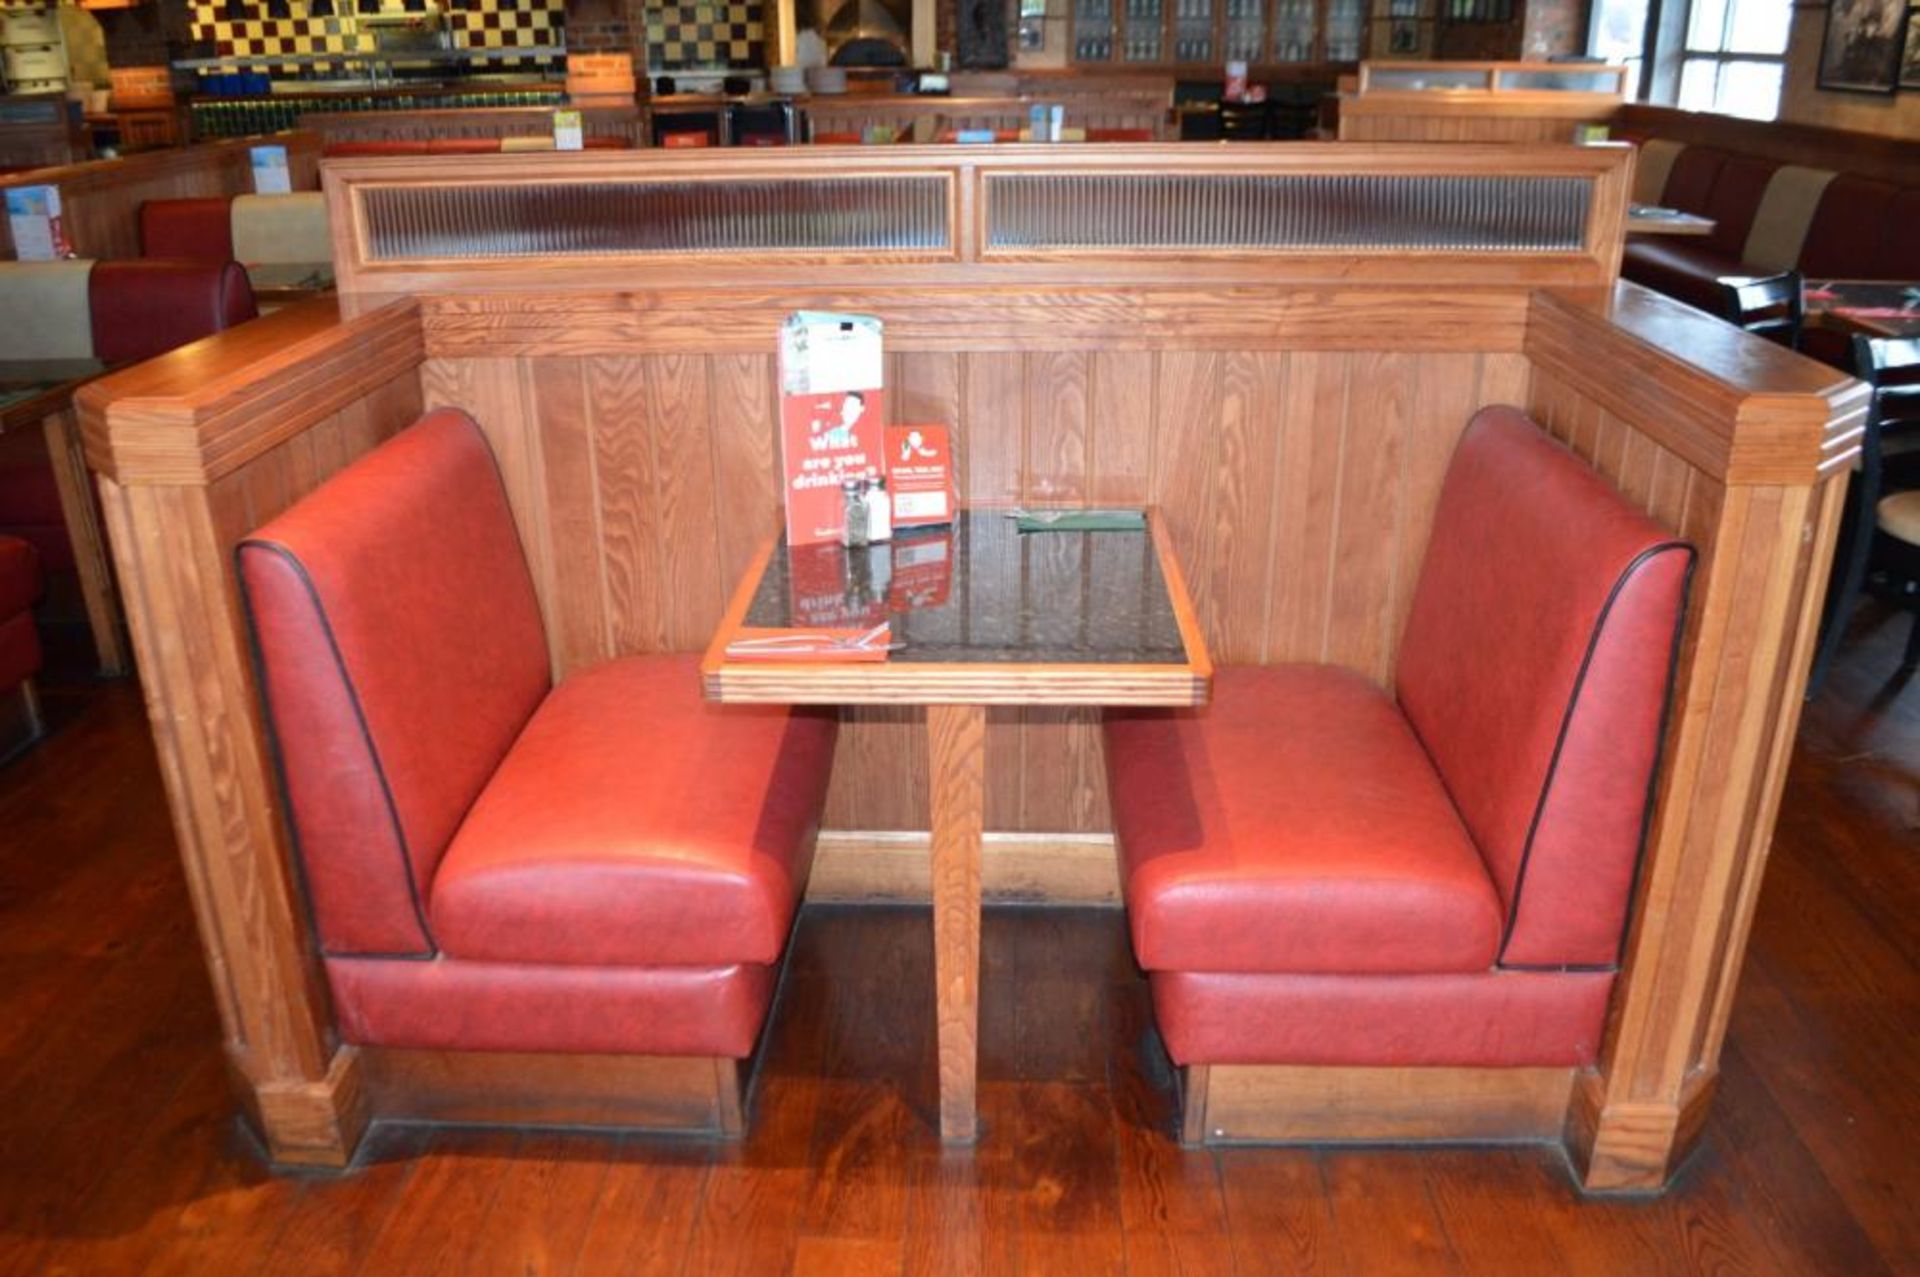 1 x Selection of Cosy Bespoke Seating Booths in a 1950's Retro American Diner Design With Dining Tab - Image 20 of 30